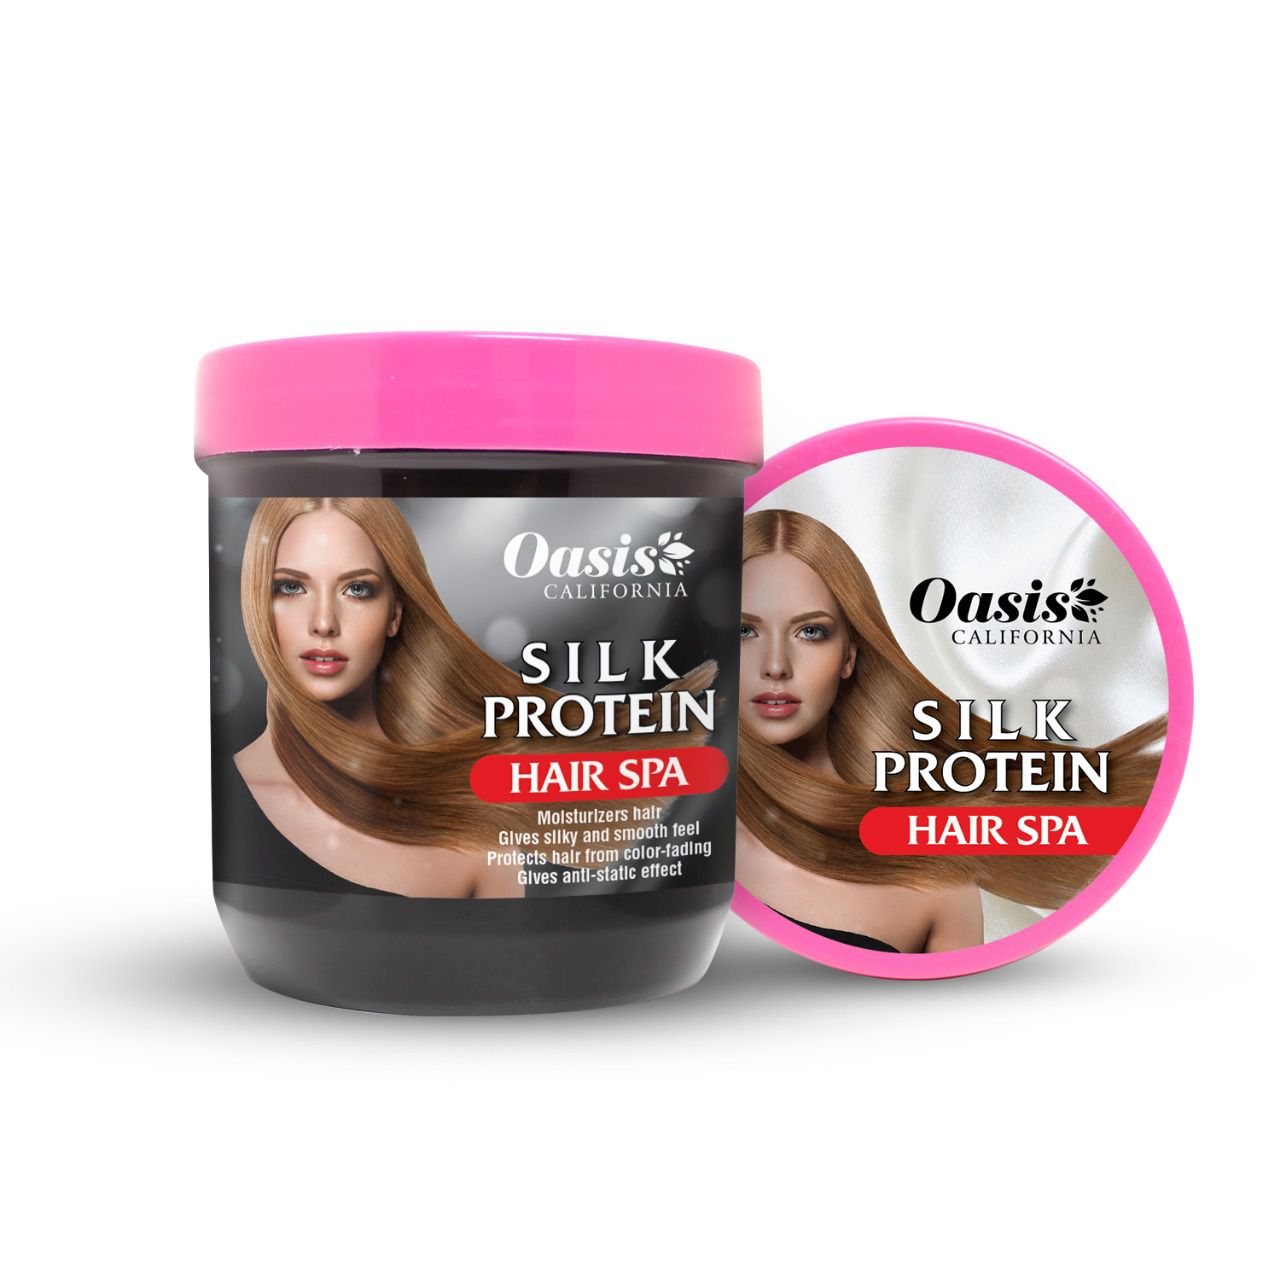 Oasis CALIFORNIA KERATIN PROTEIN HAIR SPA Hair Mask 142 g: Buy Oasis  CALIFORNIA KERATIN PROTEIN HAIR SPA Hair Mask 142 g at Best Prices in India  - Snapdeal